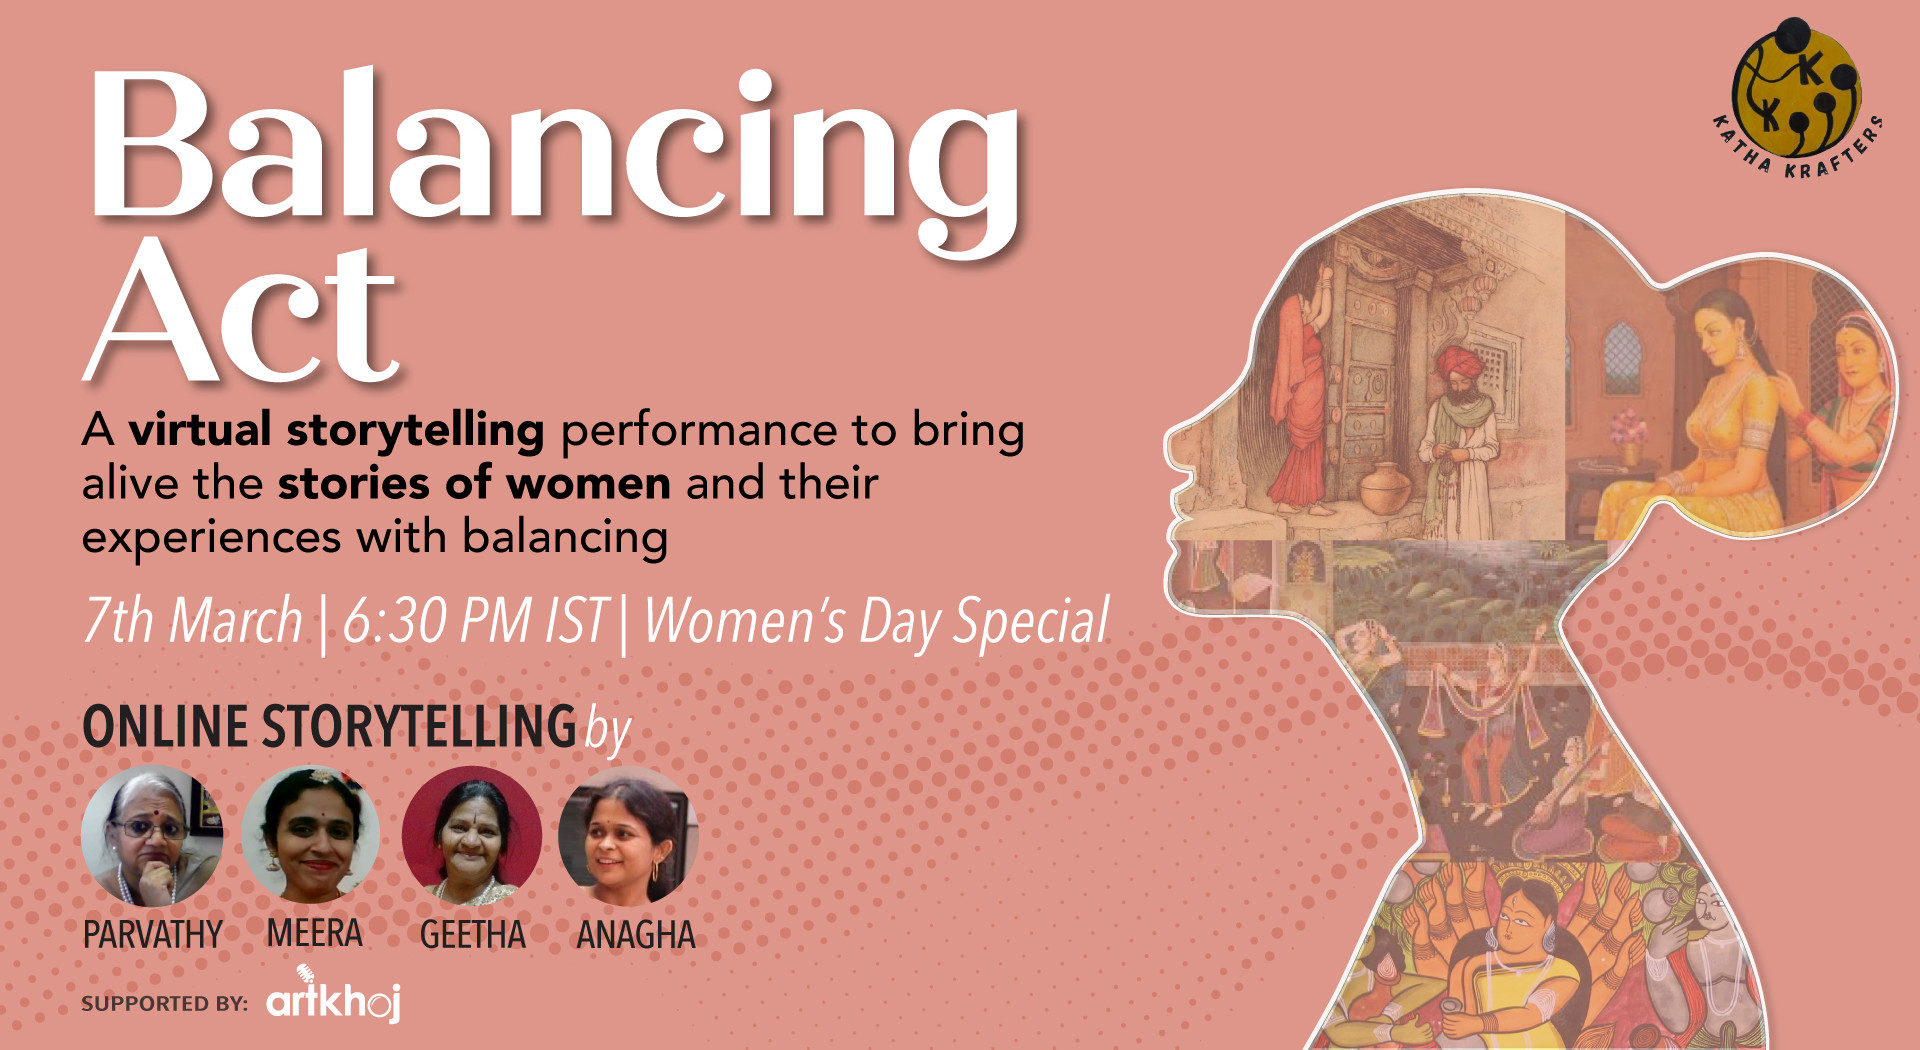 Balancing Act - Women's Day Special Storytelling Performance